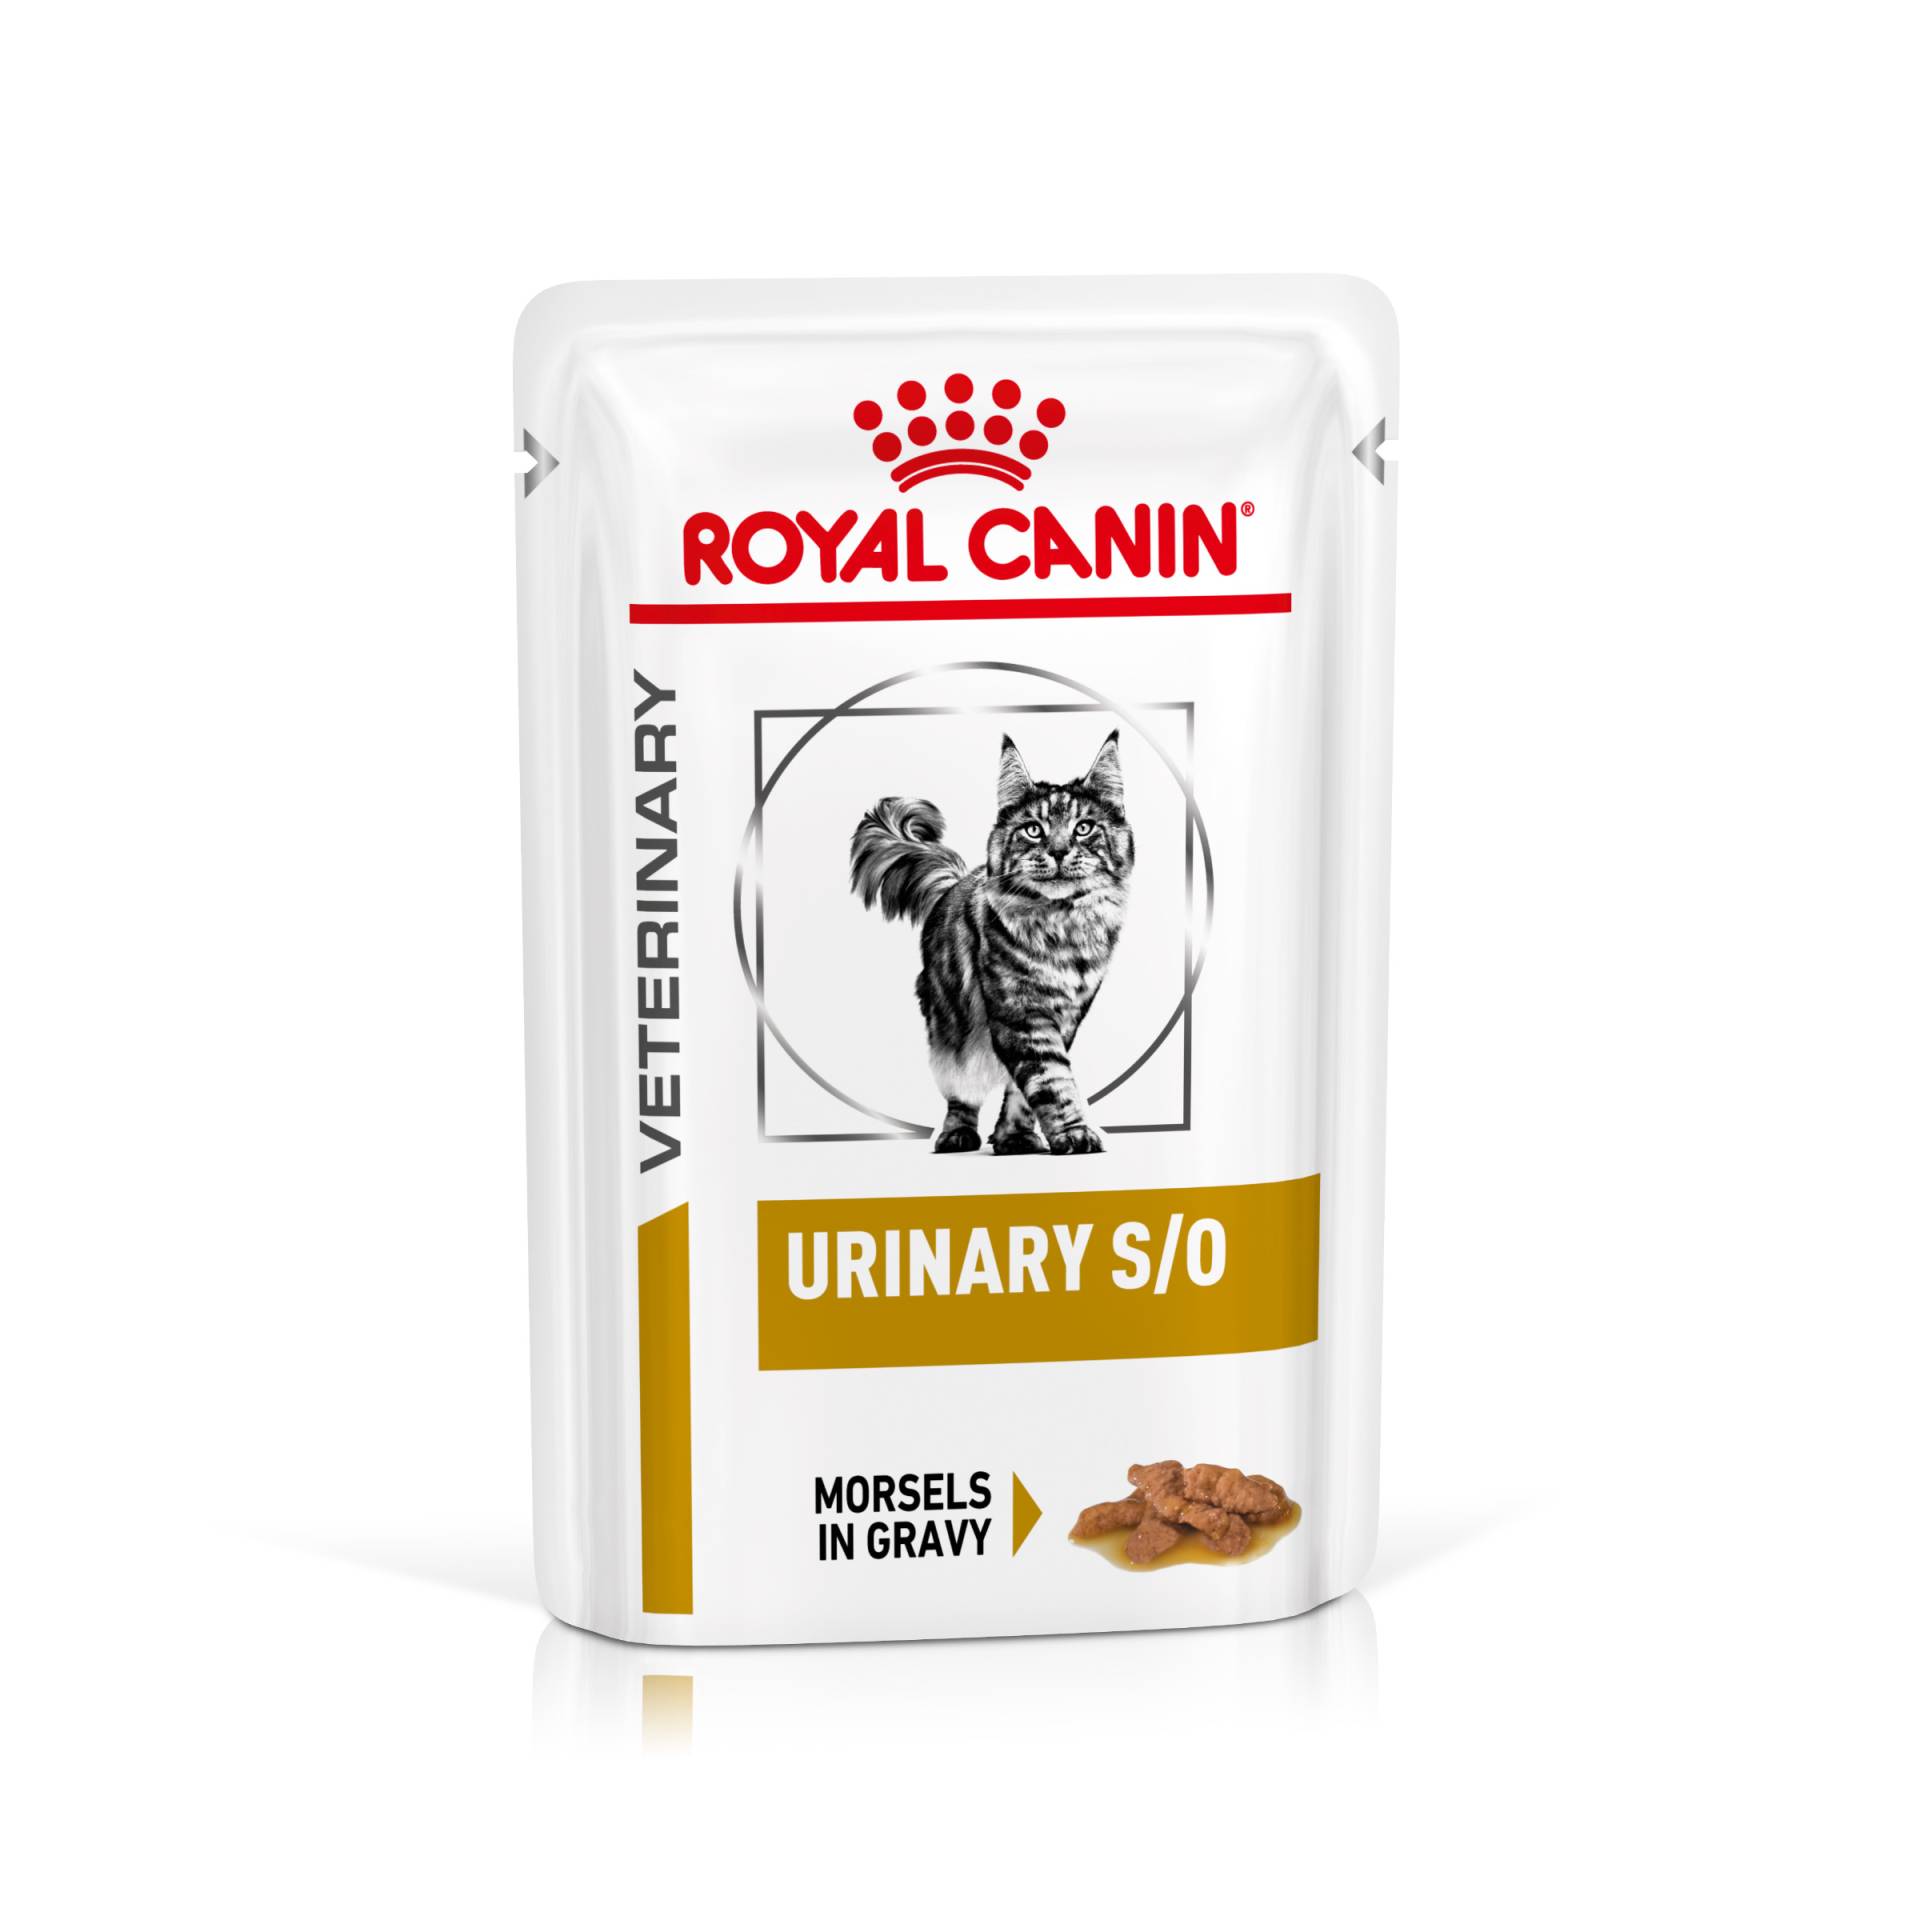 Royal Canin Veterinary Feline Urinary S/O in Soße oder Mousse - Häppchen in Soße (12 x 85 g) von Royal Canin Veterinary Diet